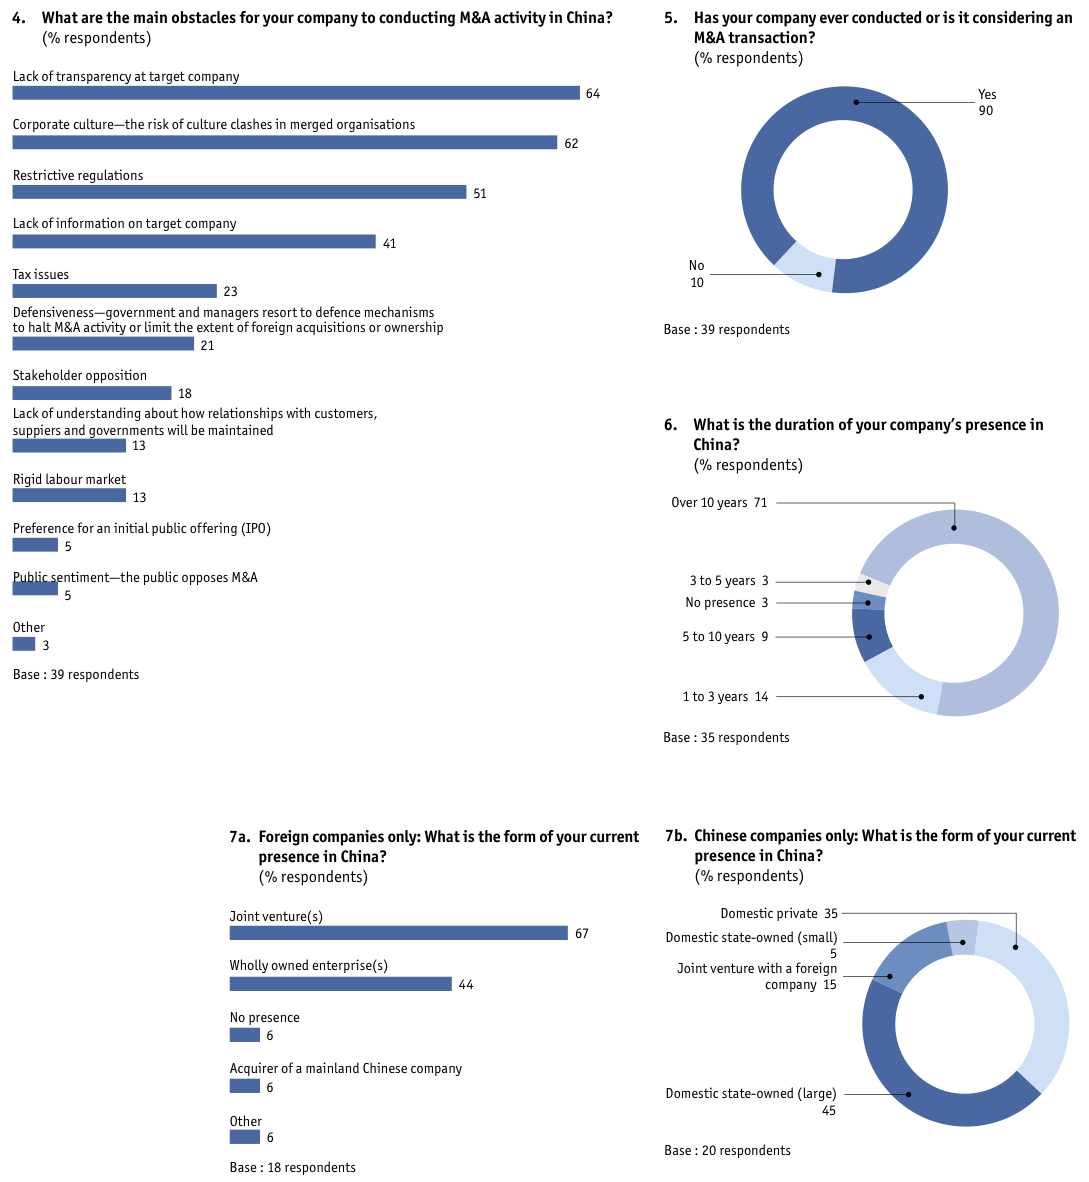 Figure 31 Appendix: Survey results/China-based companies only